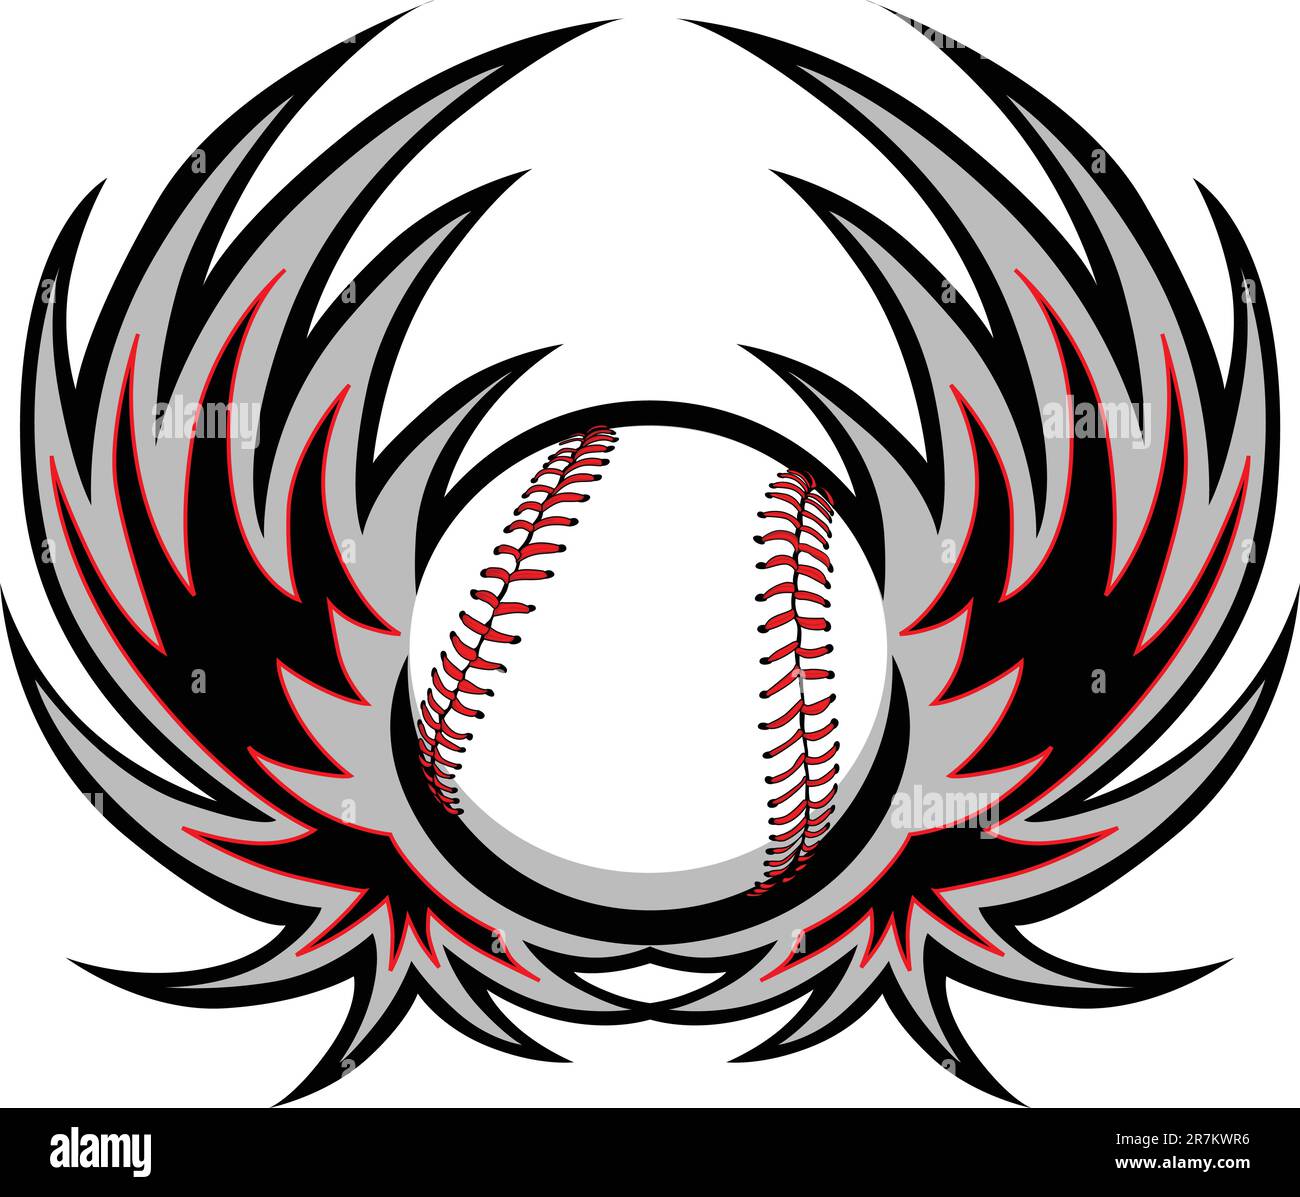 Graphic baseball image with wings Stock Vector